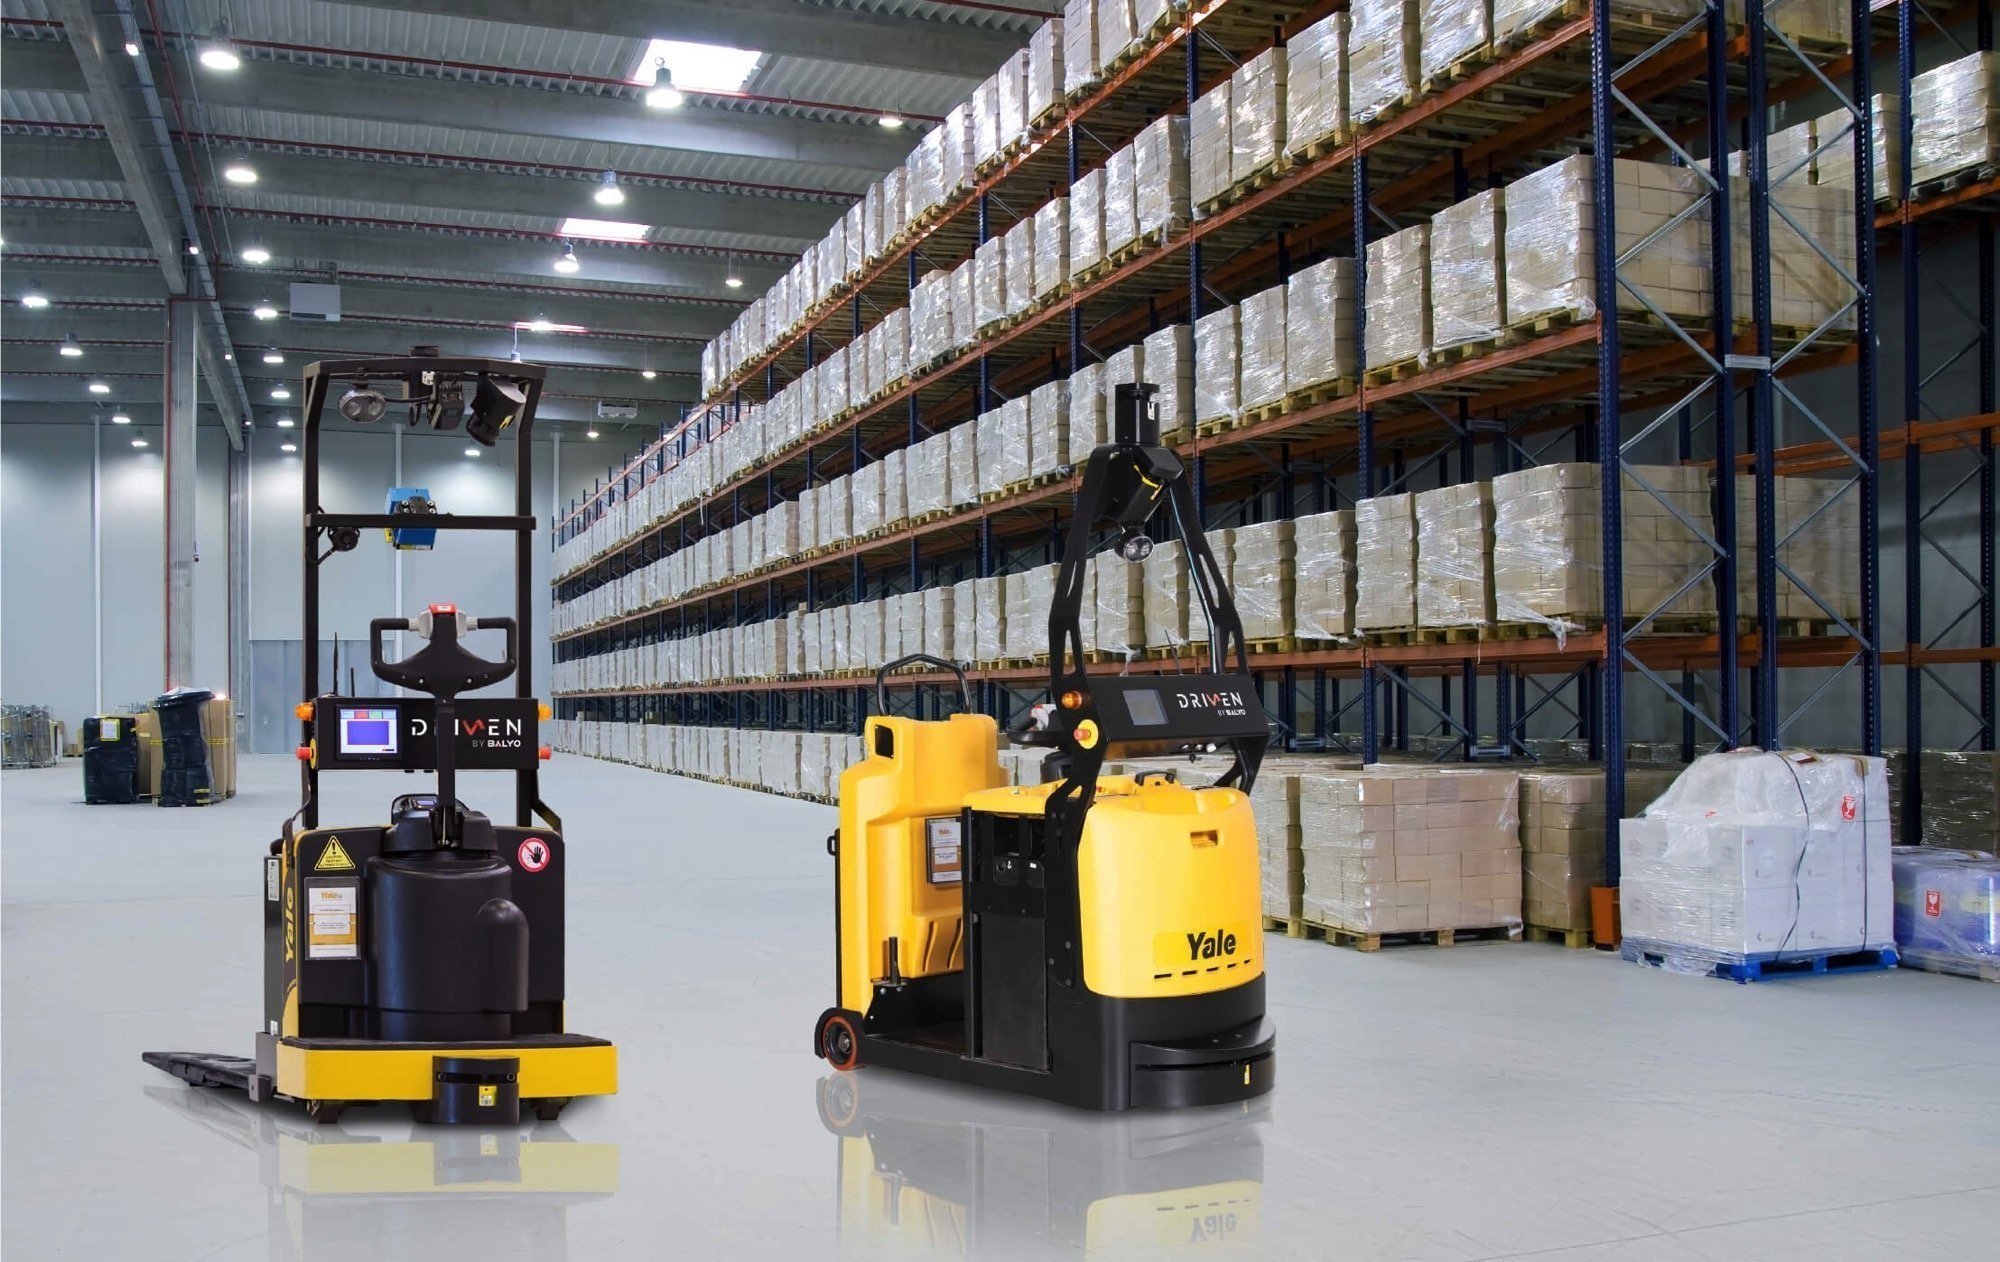 Get a detailed view of challenges in warehouse automation